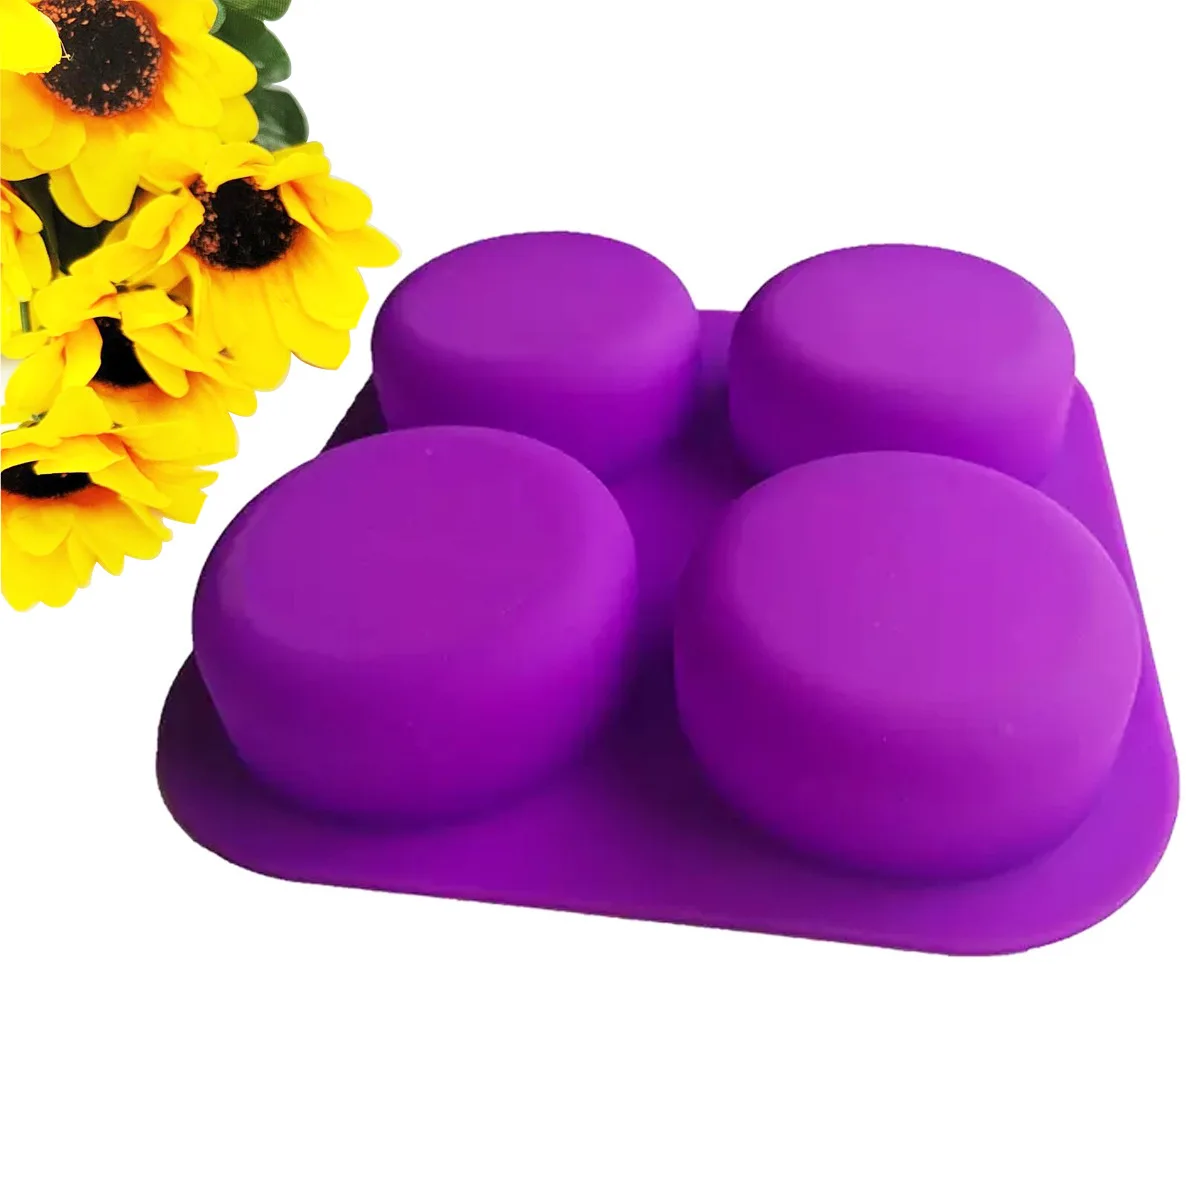 4 Cavity Round Silicone Soap Mold Handcraft Soap Making Mould DIY Cake  Chocolate Baking Tools Food Grade Silicone Soap Molds - AliExpress